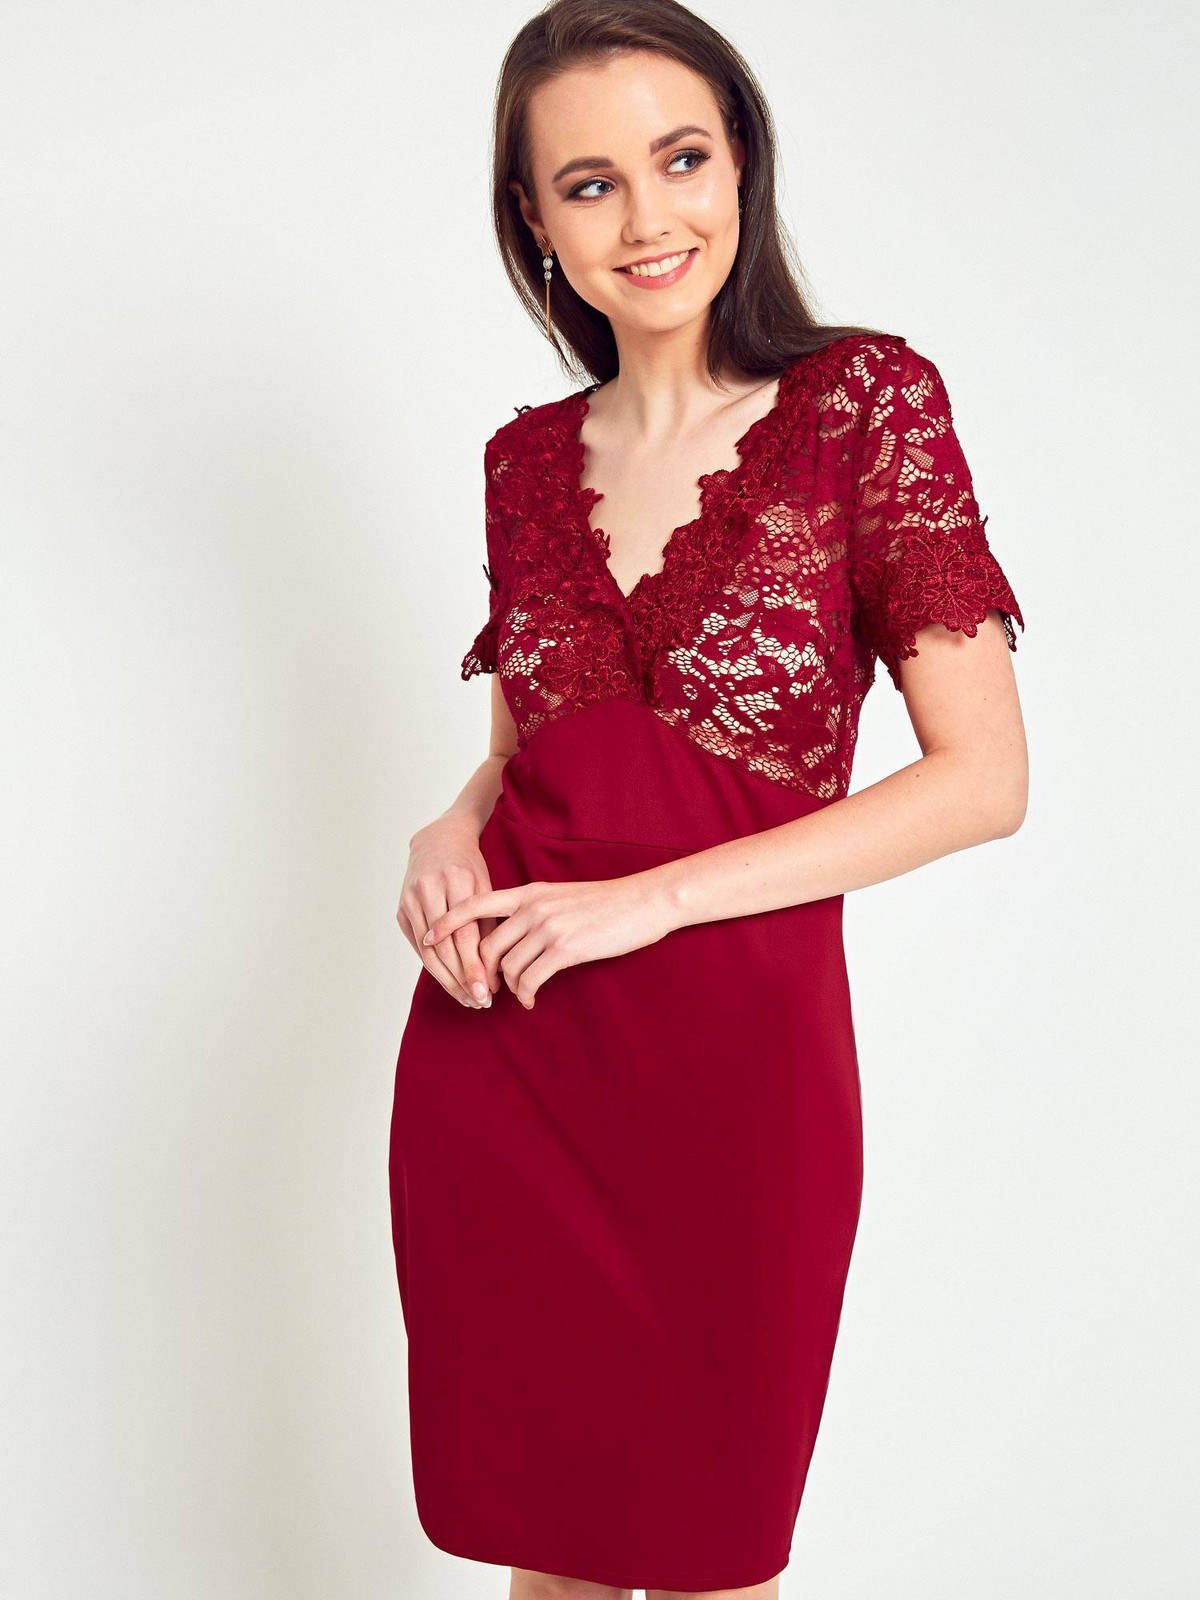 Pencil dress decorated with burgundy lace